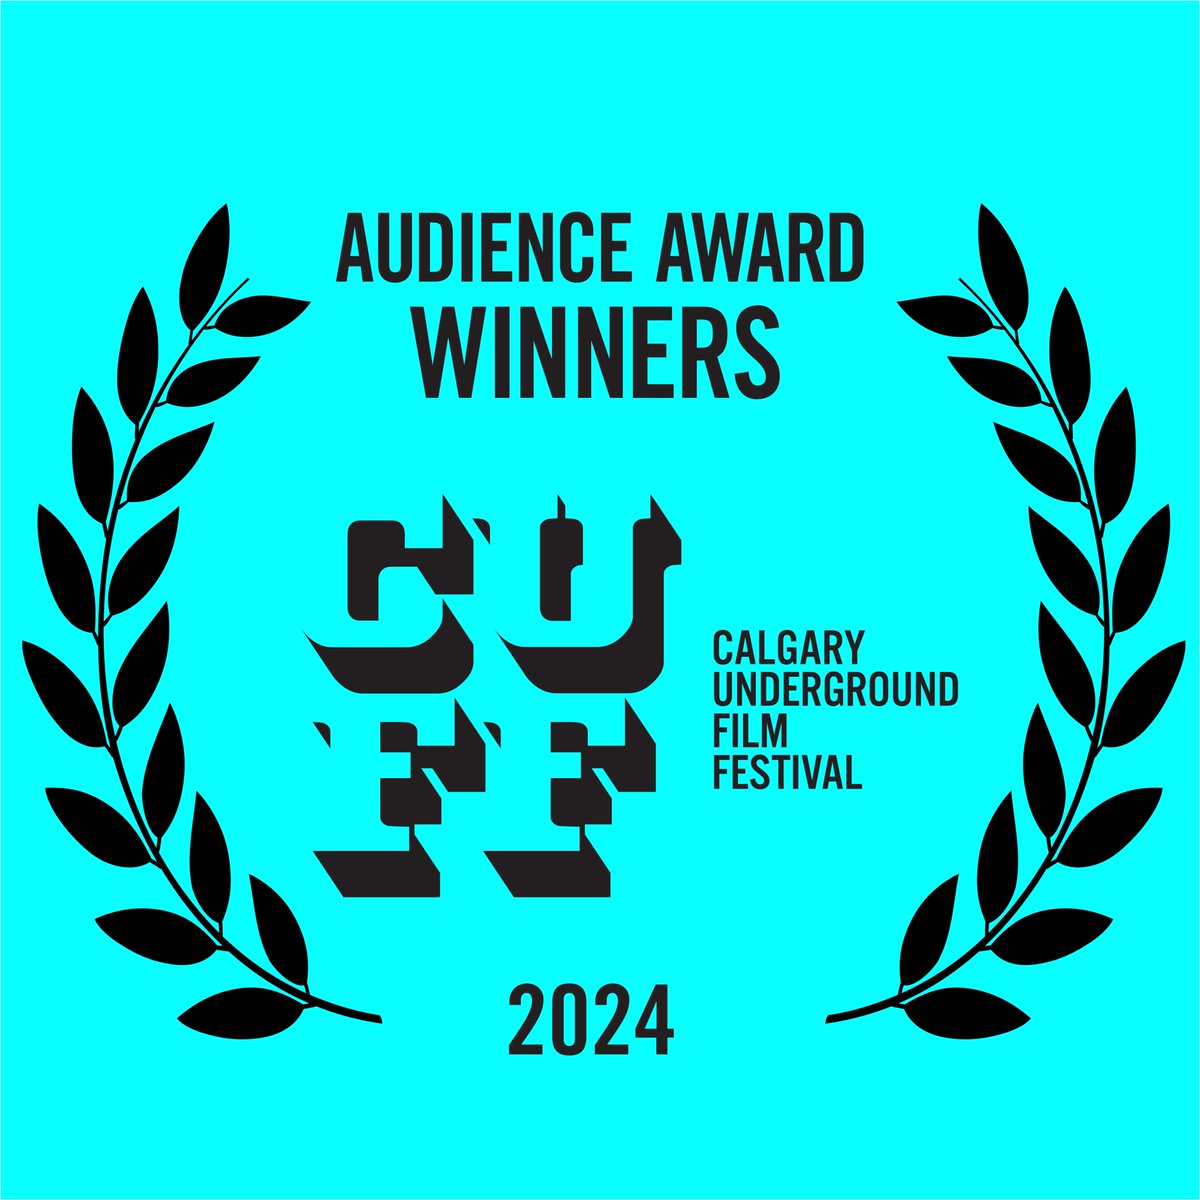 Announcing the Winners of the #CUFF24 Audience Awards! 🏆 BEST NARRATIVE FEATURE: THELMA 🏆 BEST DOCUMENTARY FEATURE: SCREAM OF MY BLOOD 🏆 BEST CANADIAN SHORT: THE YEAR OF STARING AT NOSES 🏆 BEST INTERNATIONAL SHORT: FAVOURITES calgaryundergroundfilm.org/2024-awards